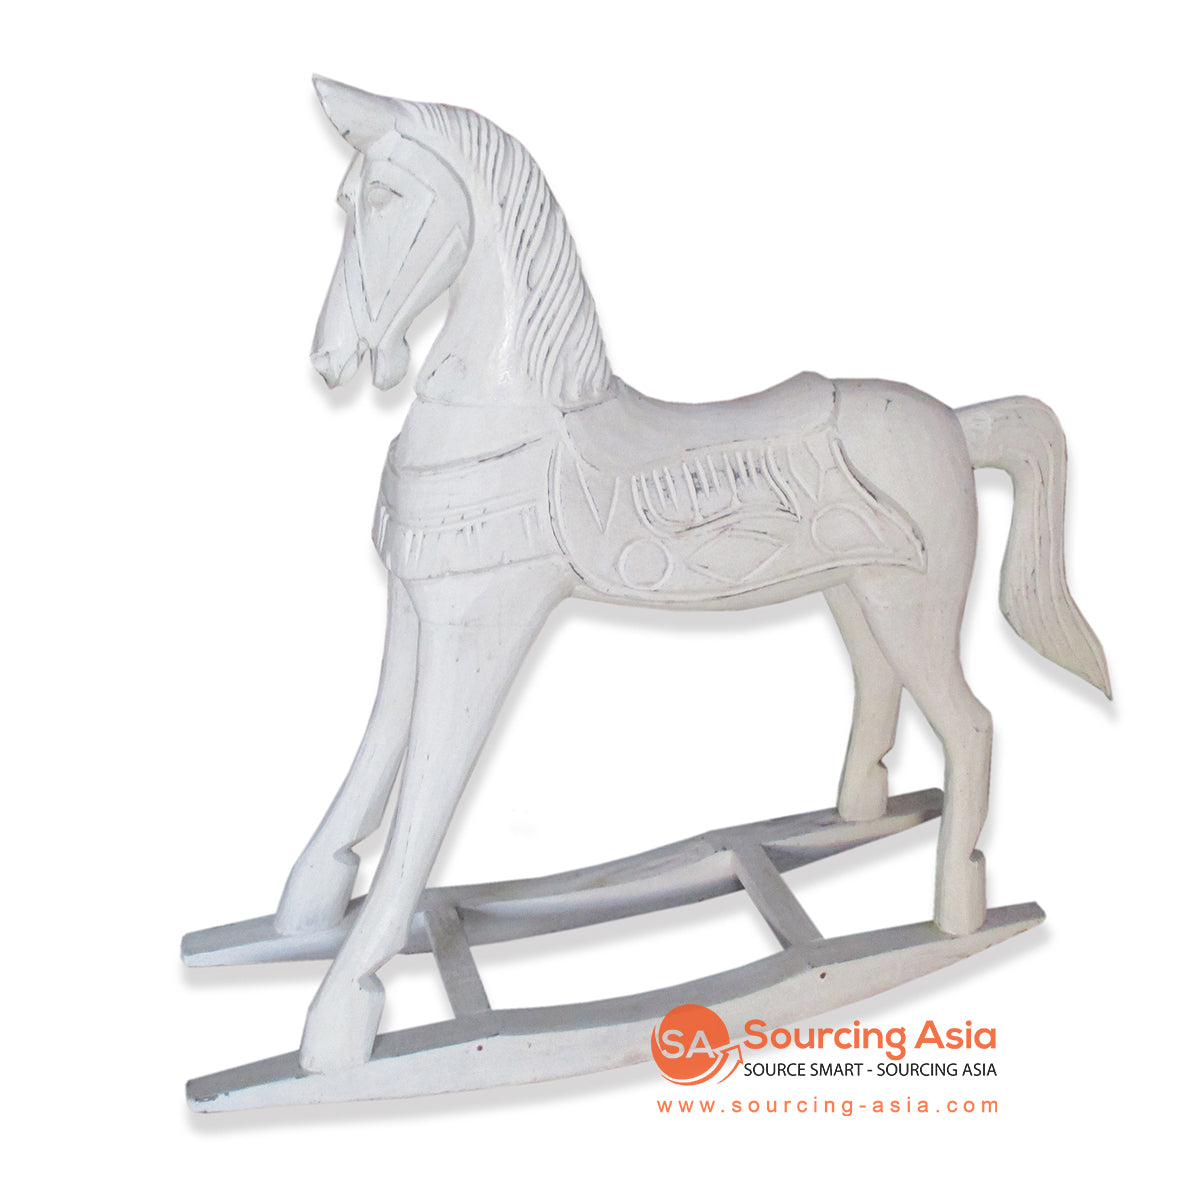 THE071-L LARGE WHITE WASH WOODEN HORSE DECORATION